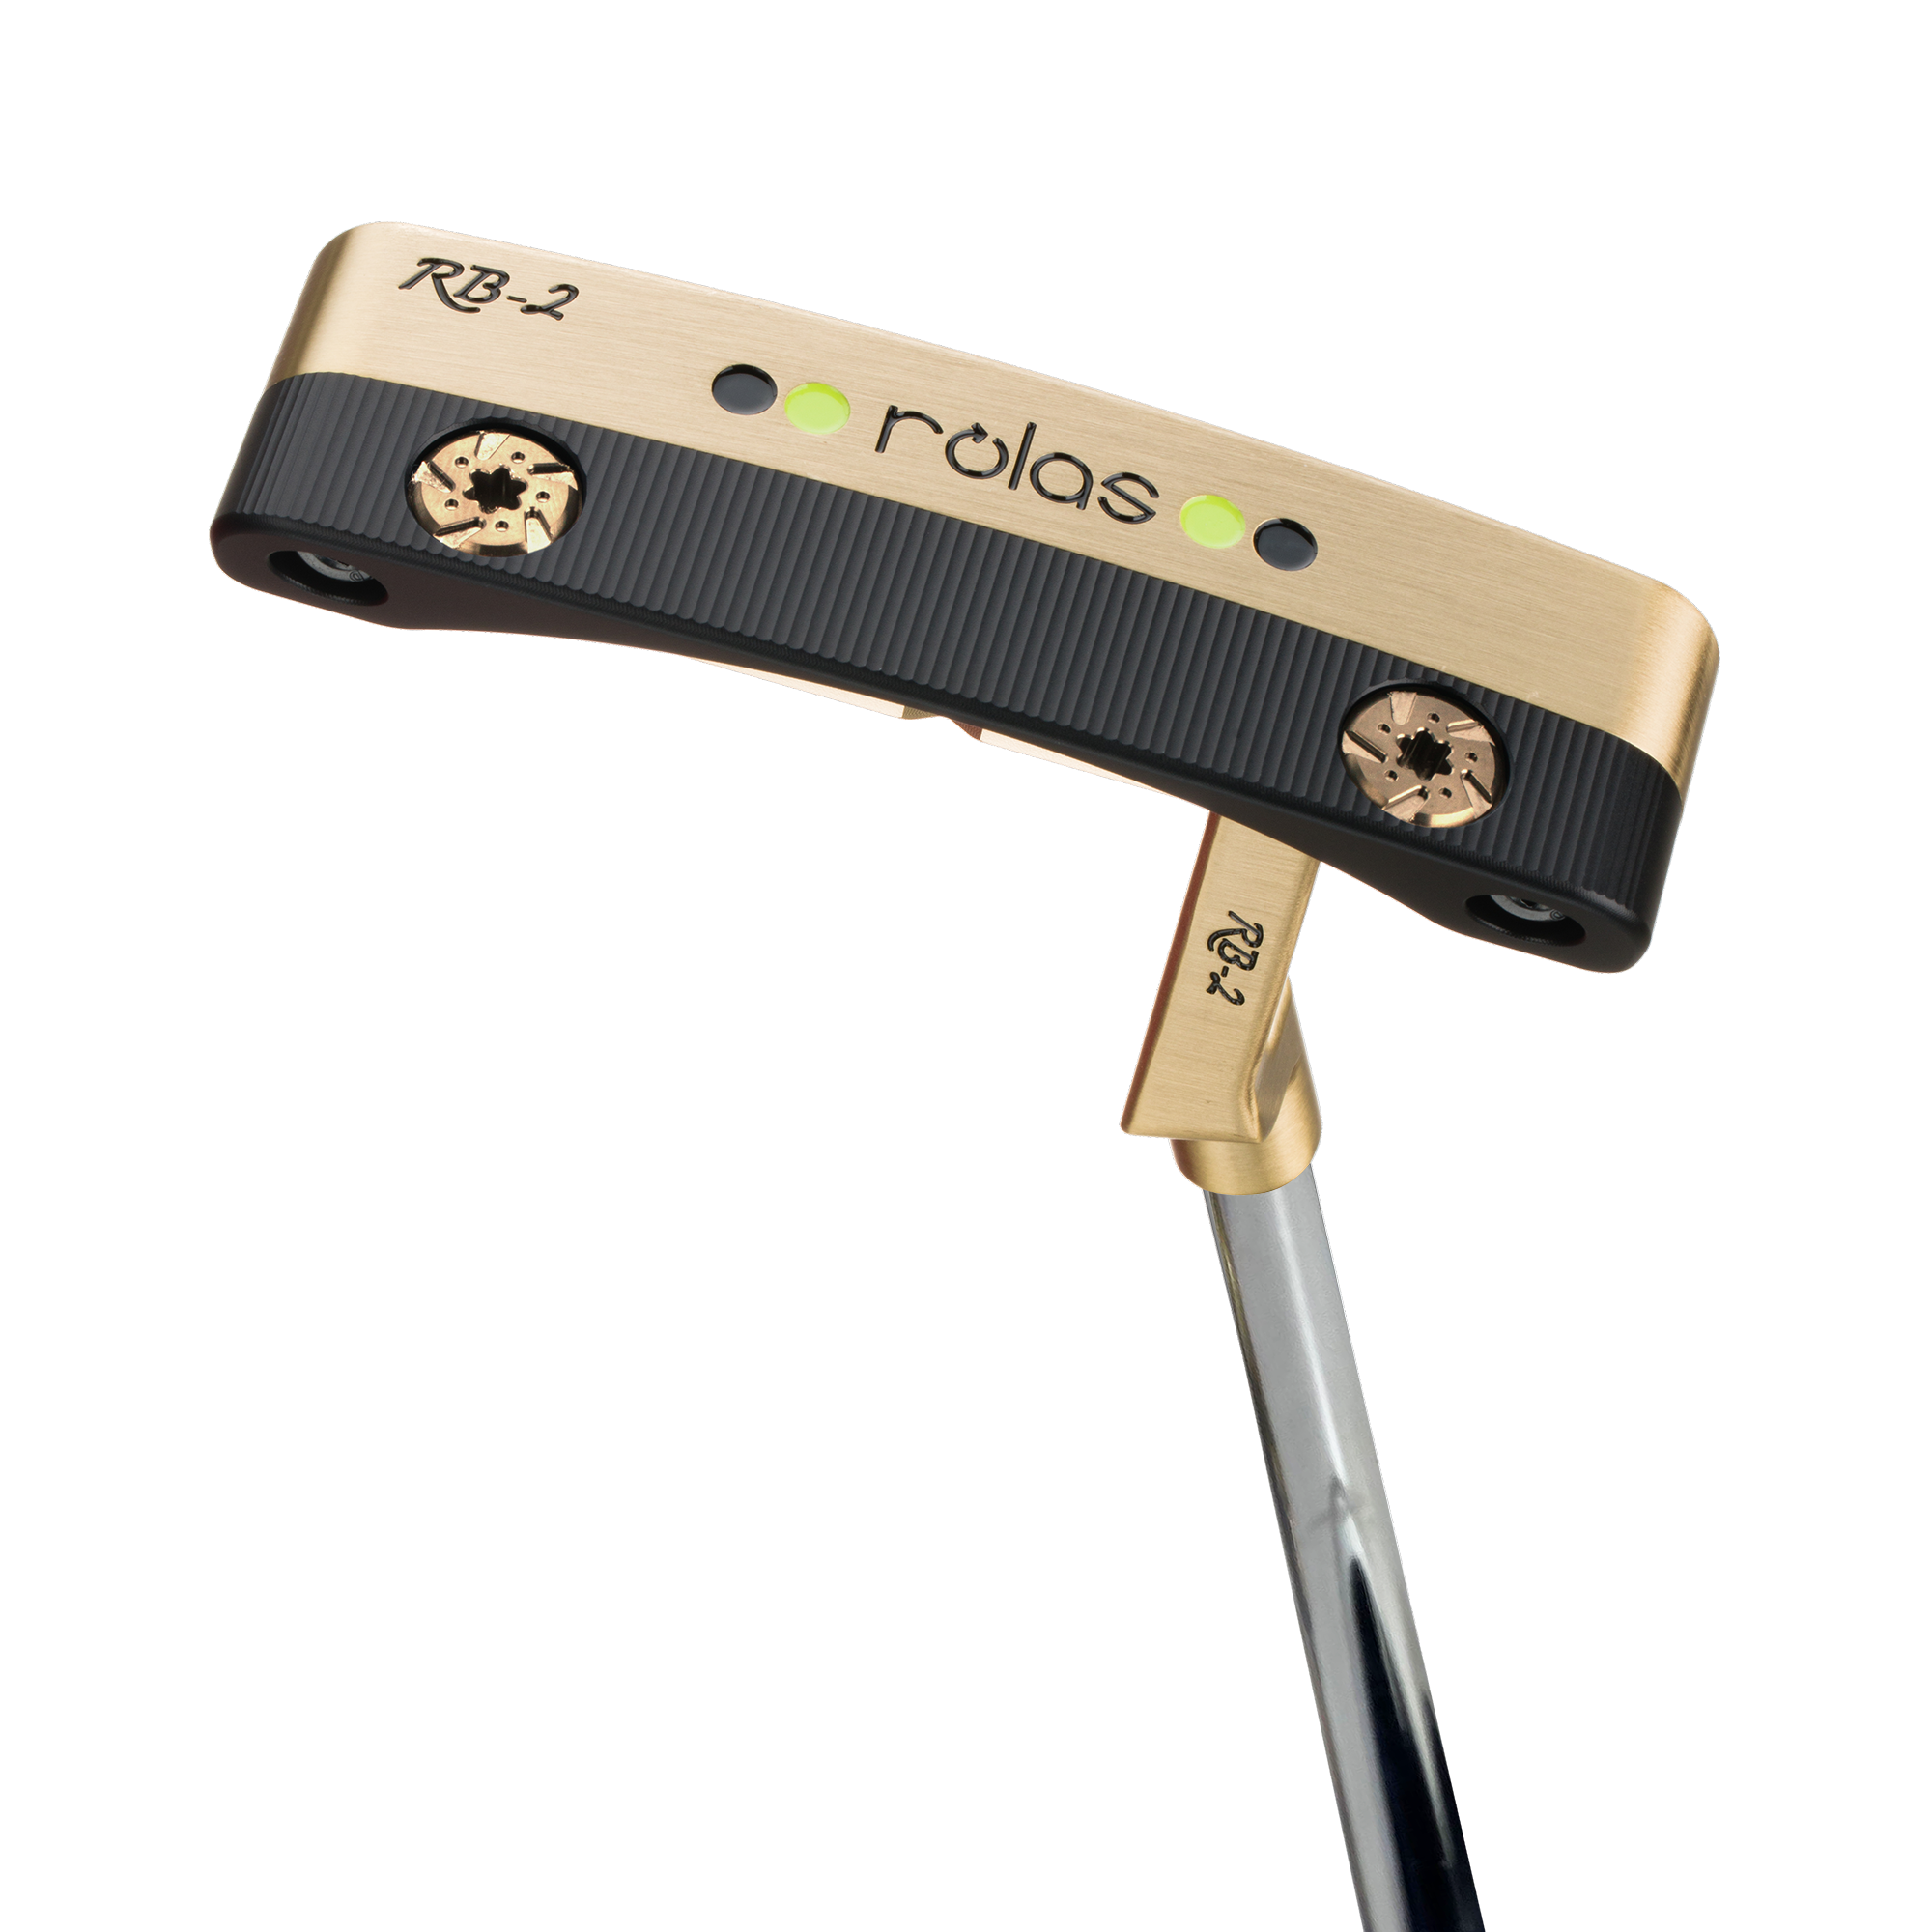 This picture shows the SmithWorks Blade Putter Rolas RB2